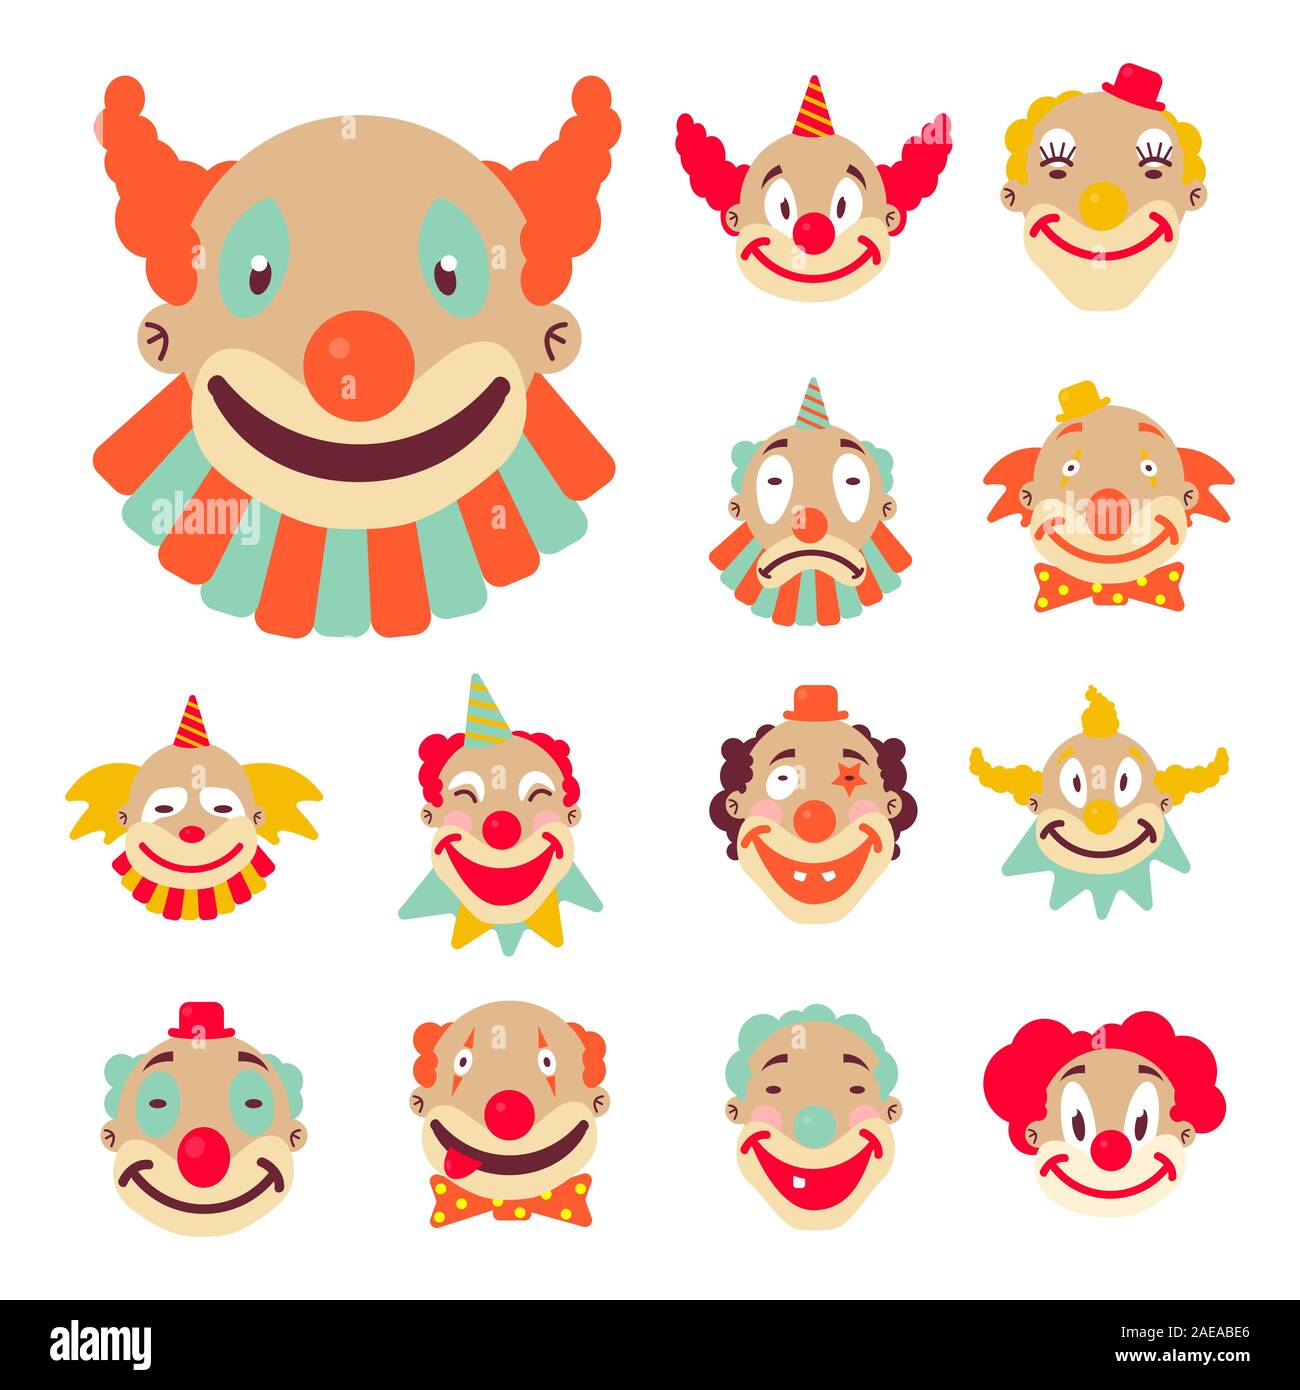 Clown faces with colourful wigs and accessories icons Stock Vector